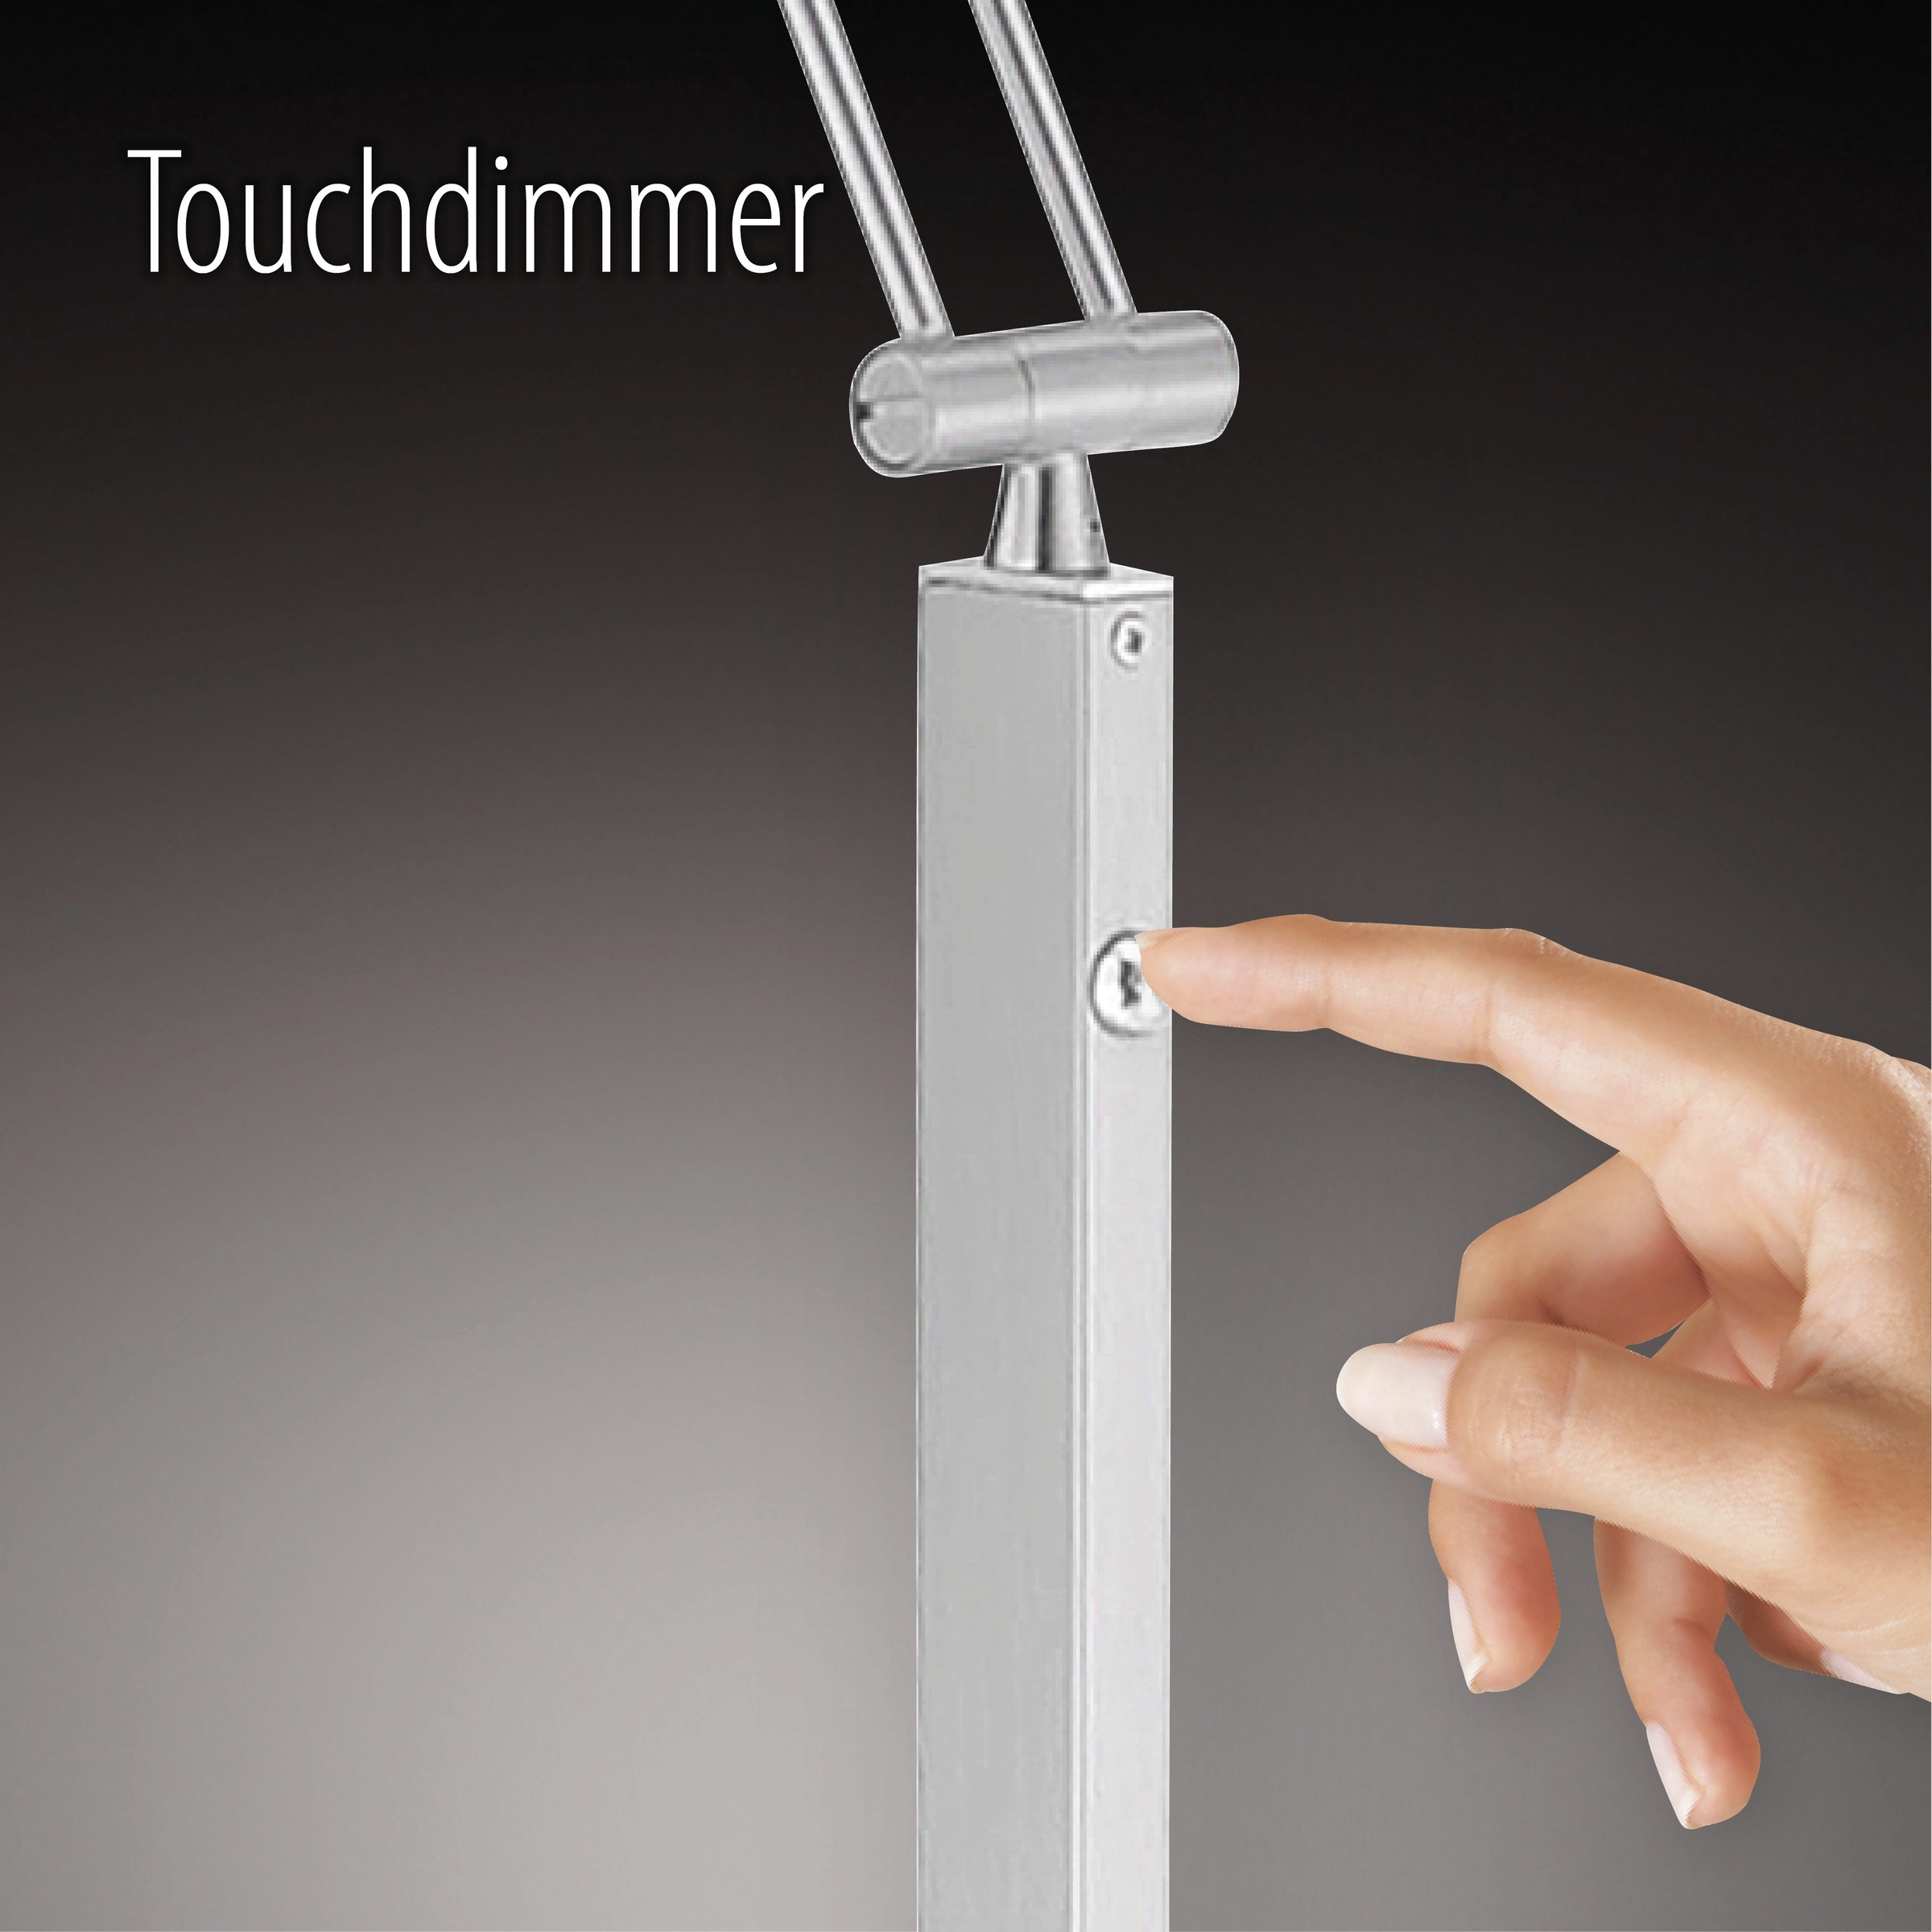 JUST LIGHT Tischleuchte »KELLY«, 1 flammig-flammig, LED, CCT - tunable white, dimmbar über Touchdimmer